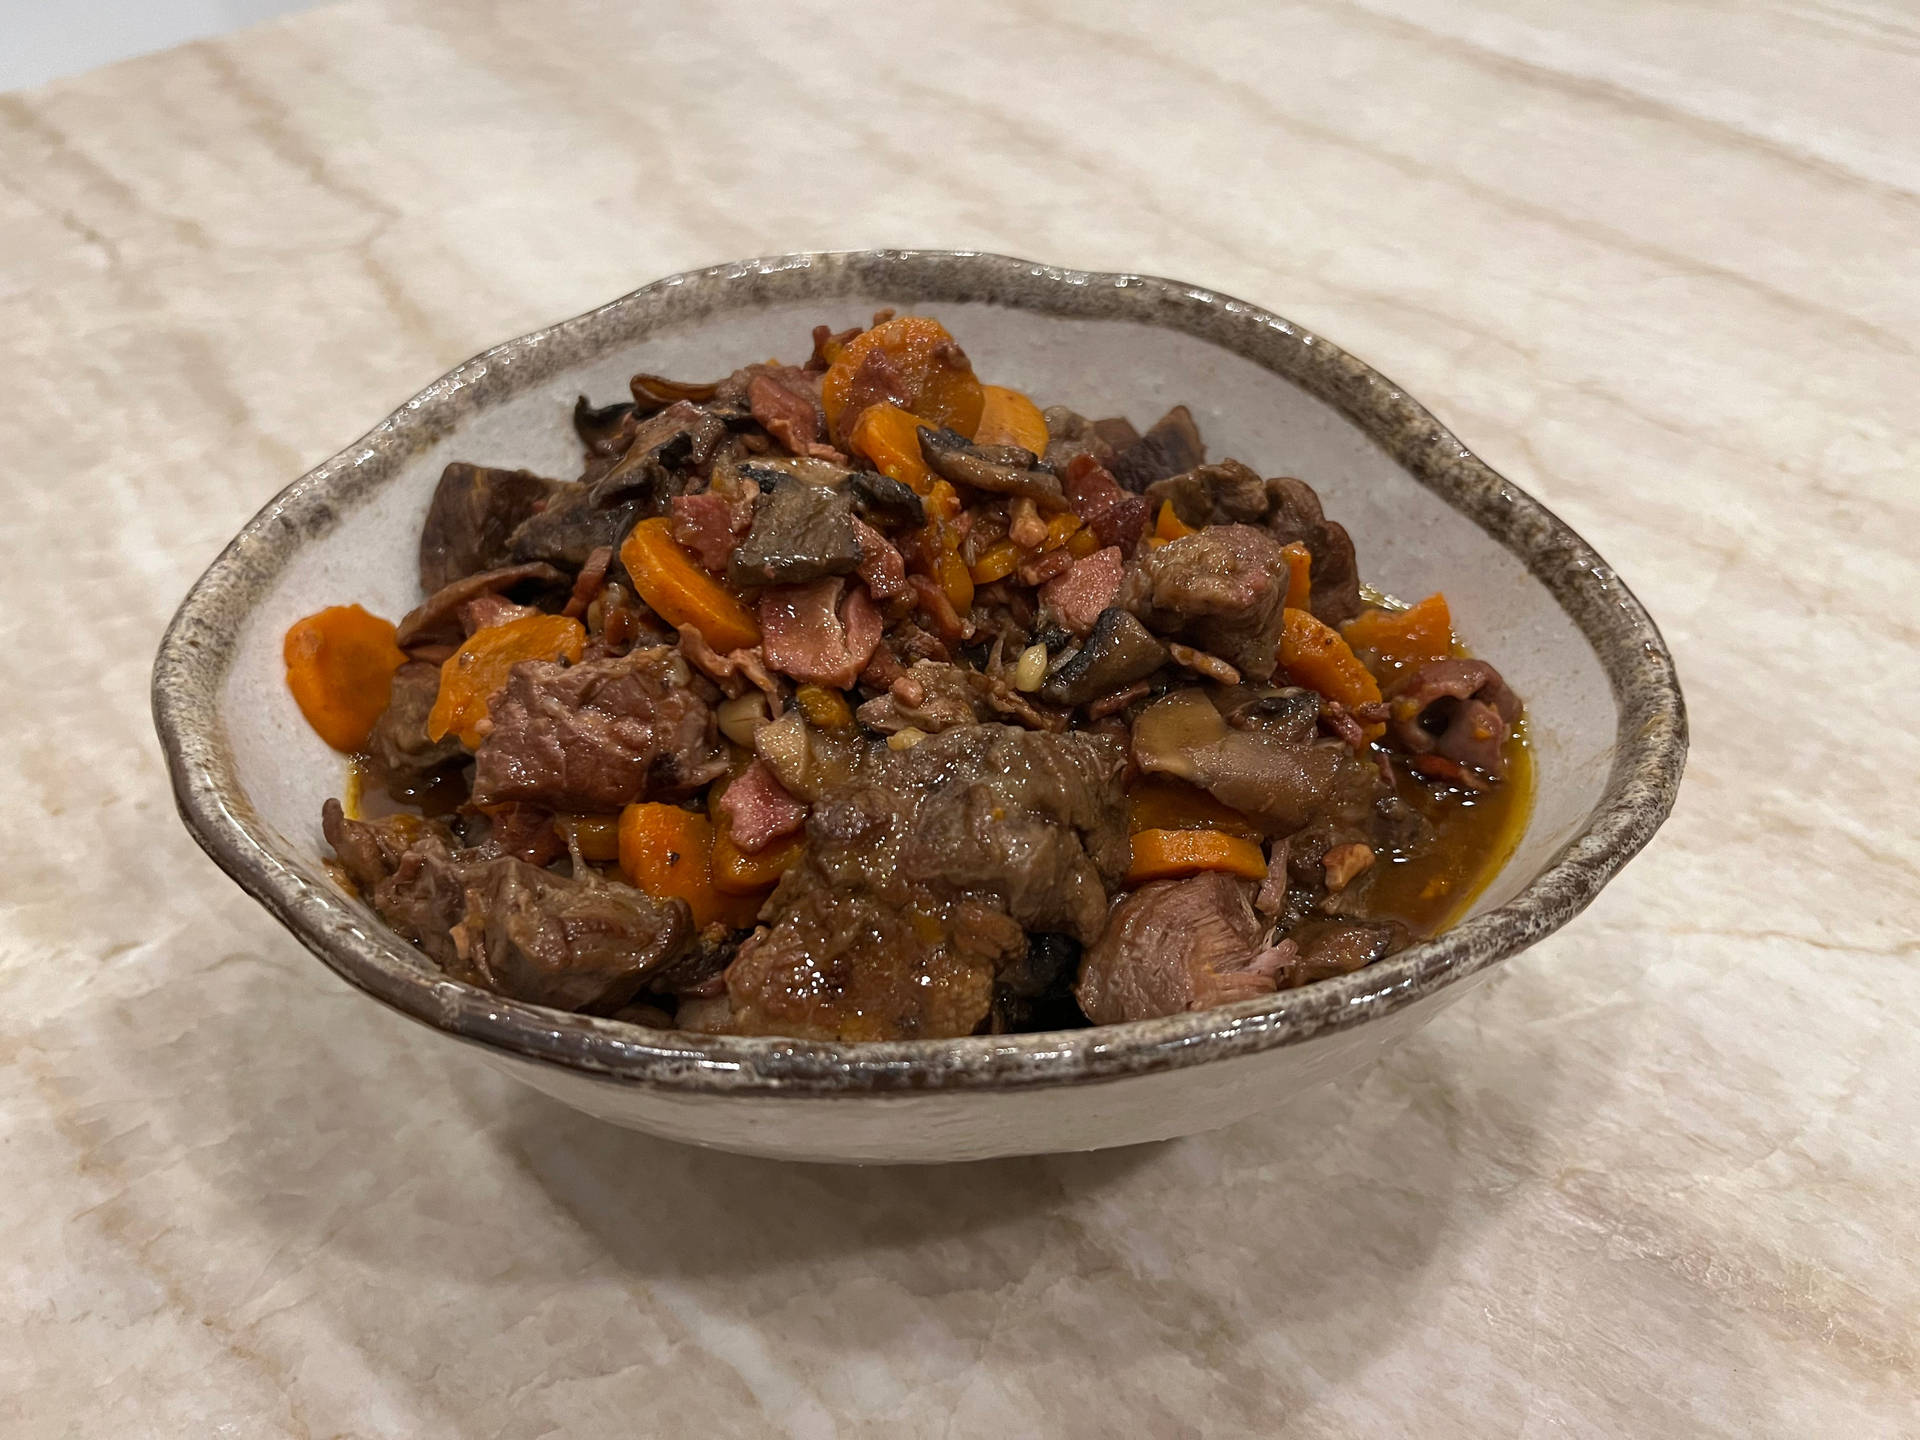 Mouthwatering Beef Bourguignon in Rustic Setting Wallpaper